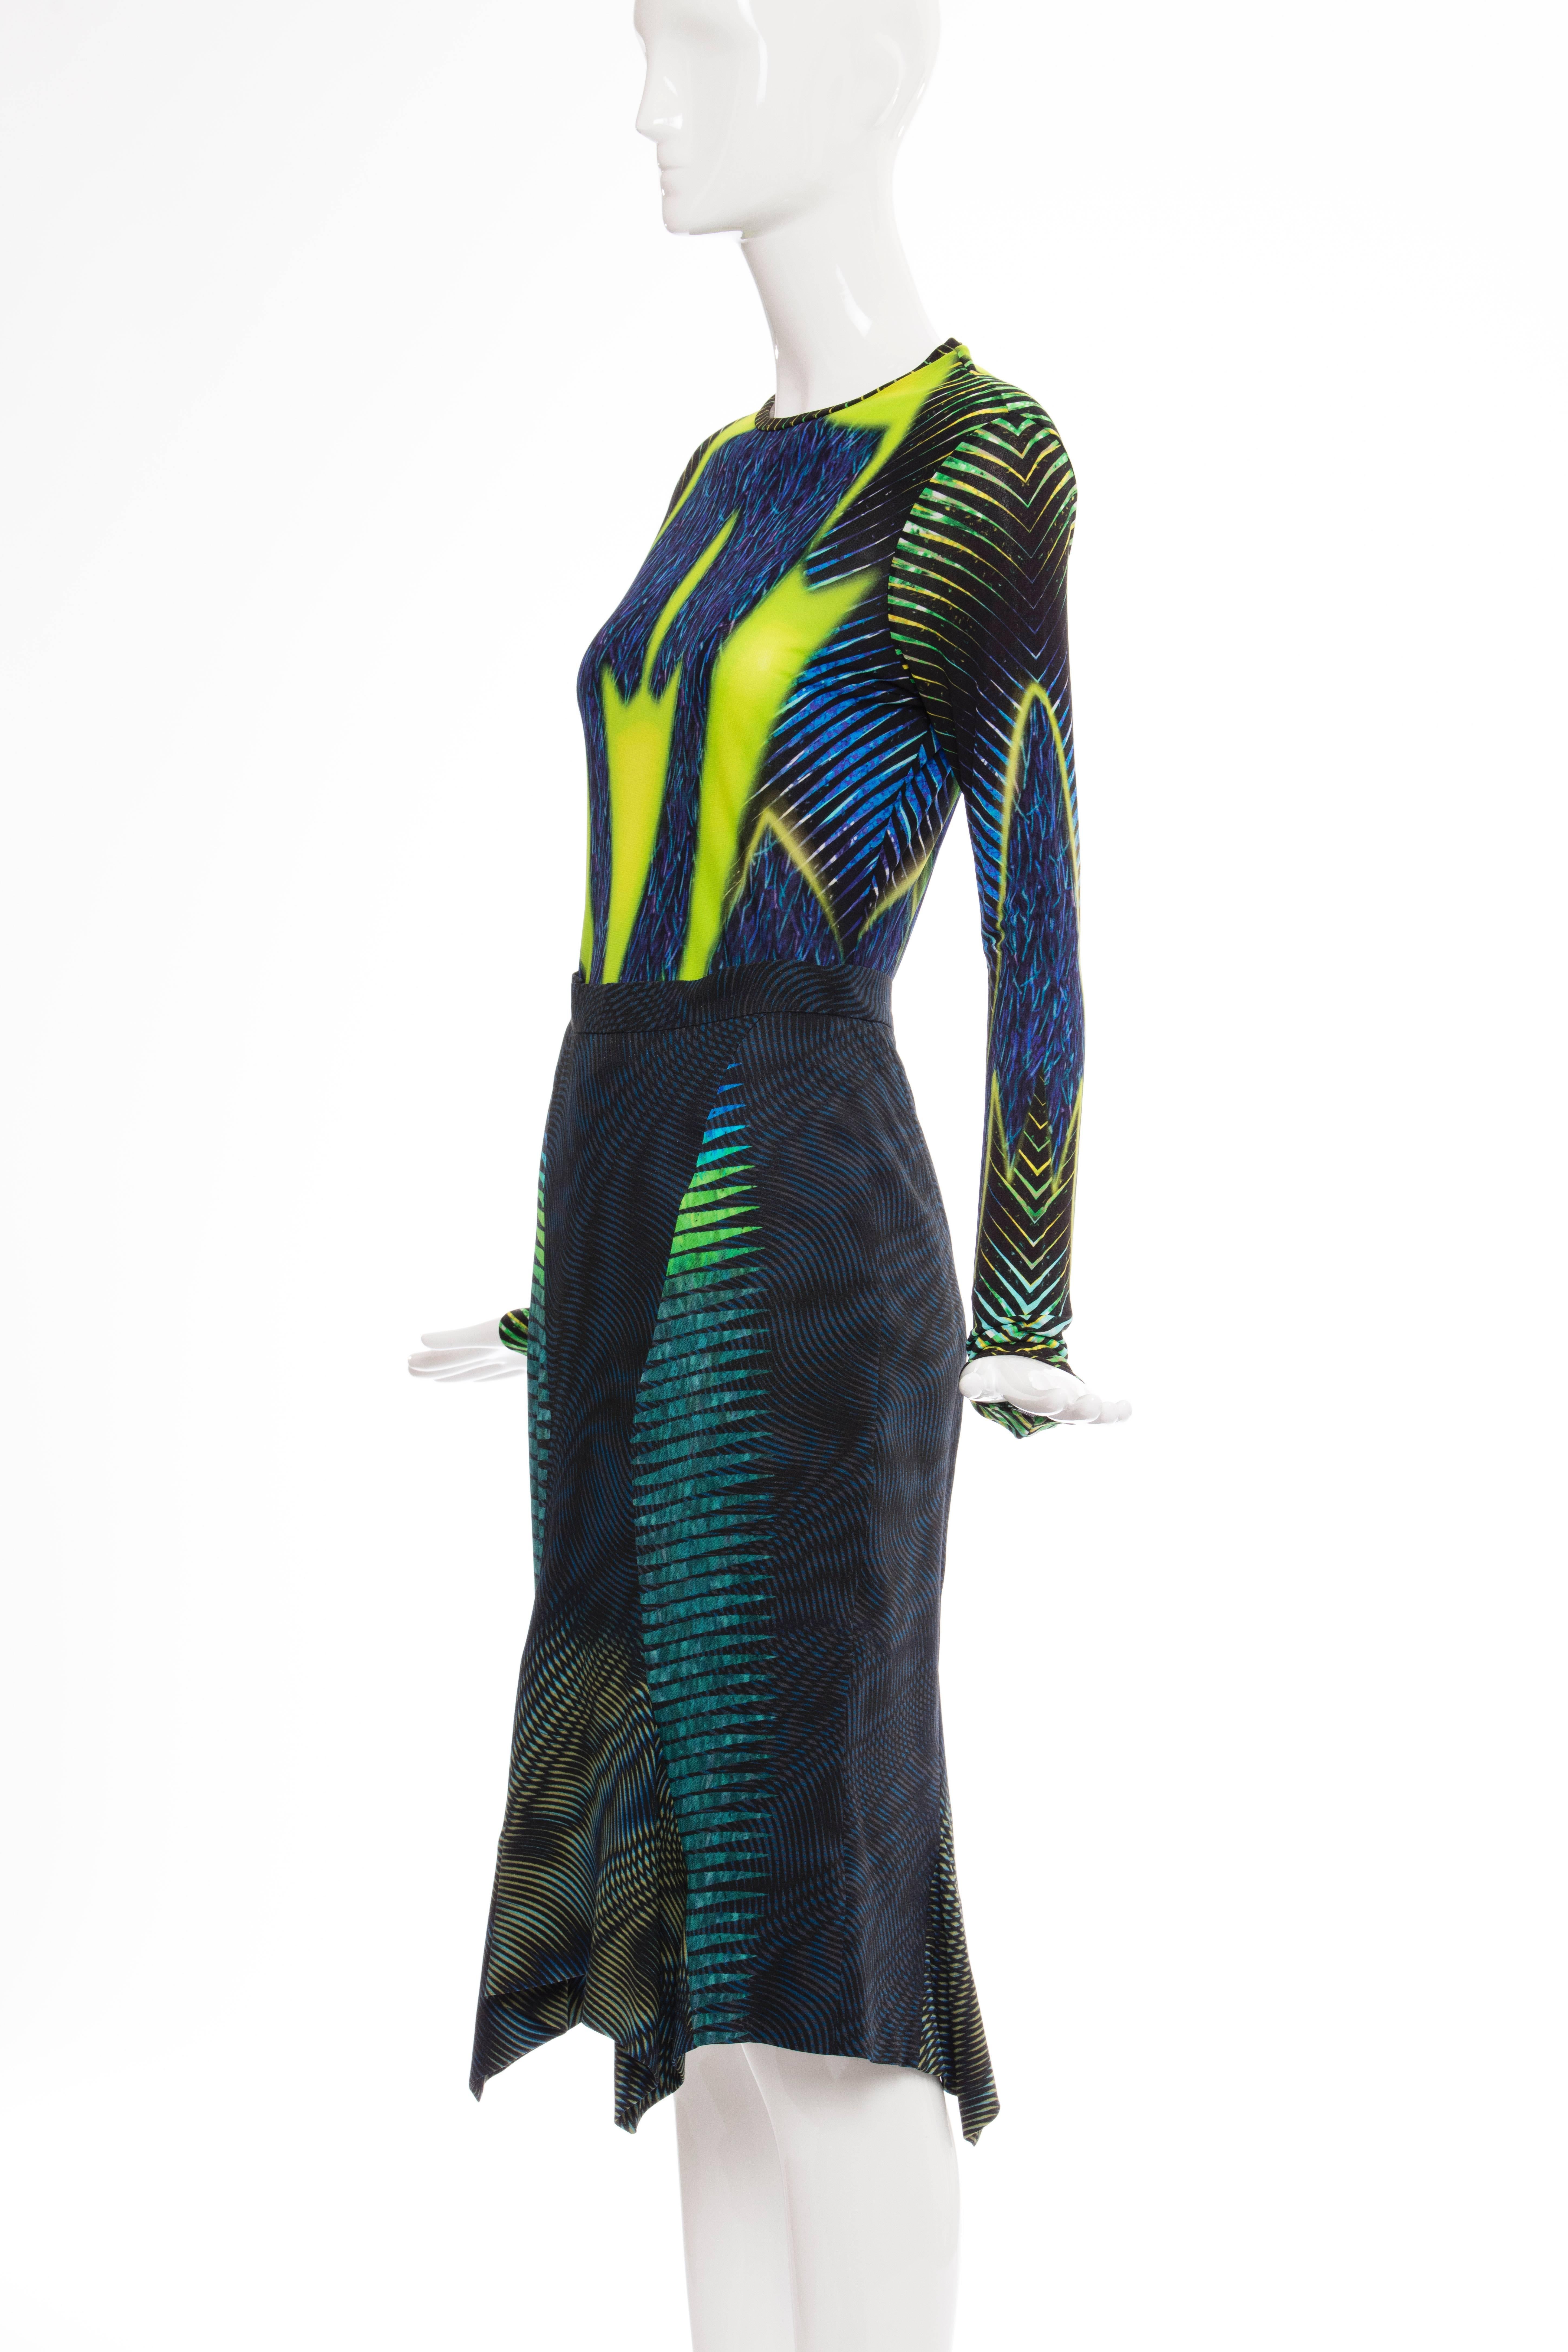 Black Peter Pilotto Graphic Printed Skirt Suit, Fall 2012 For Sale